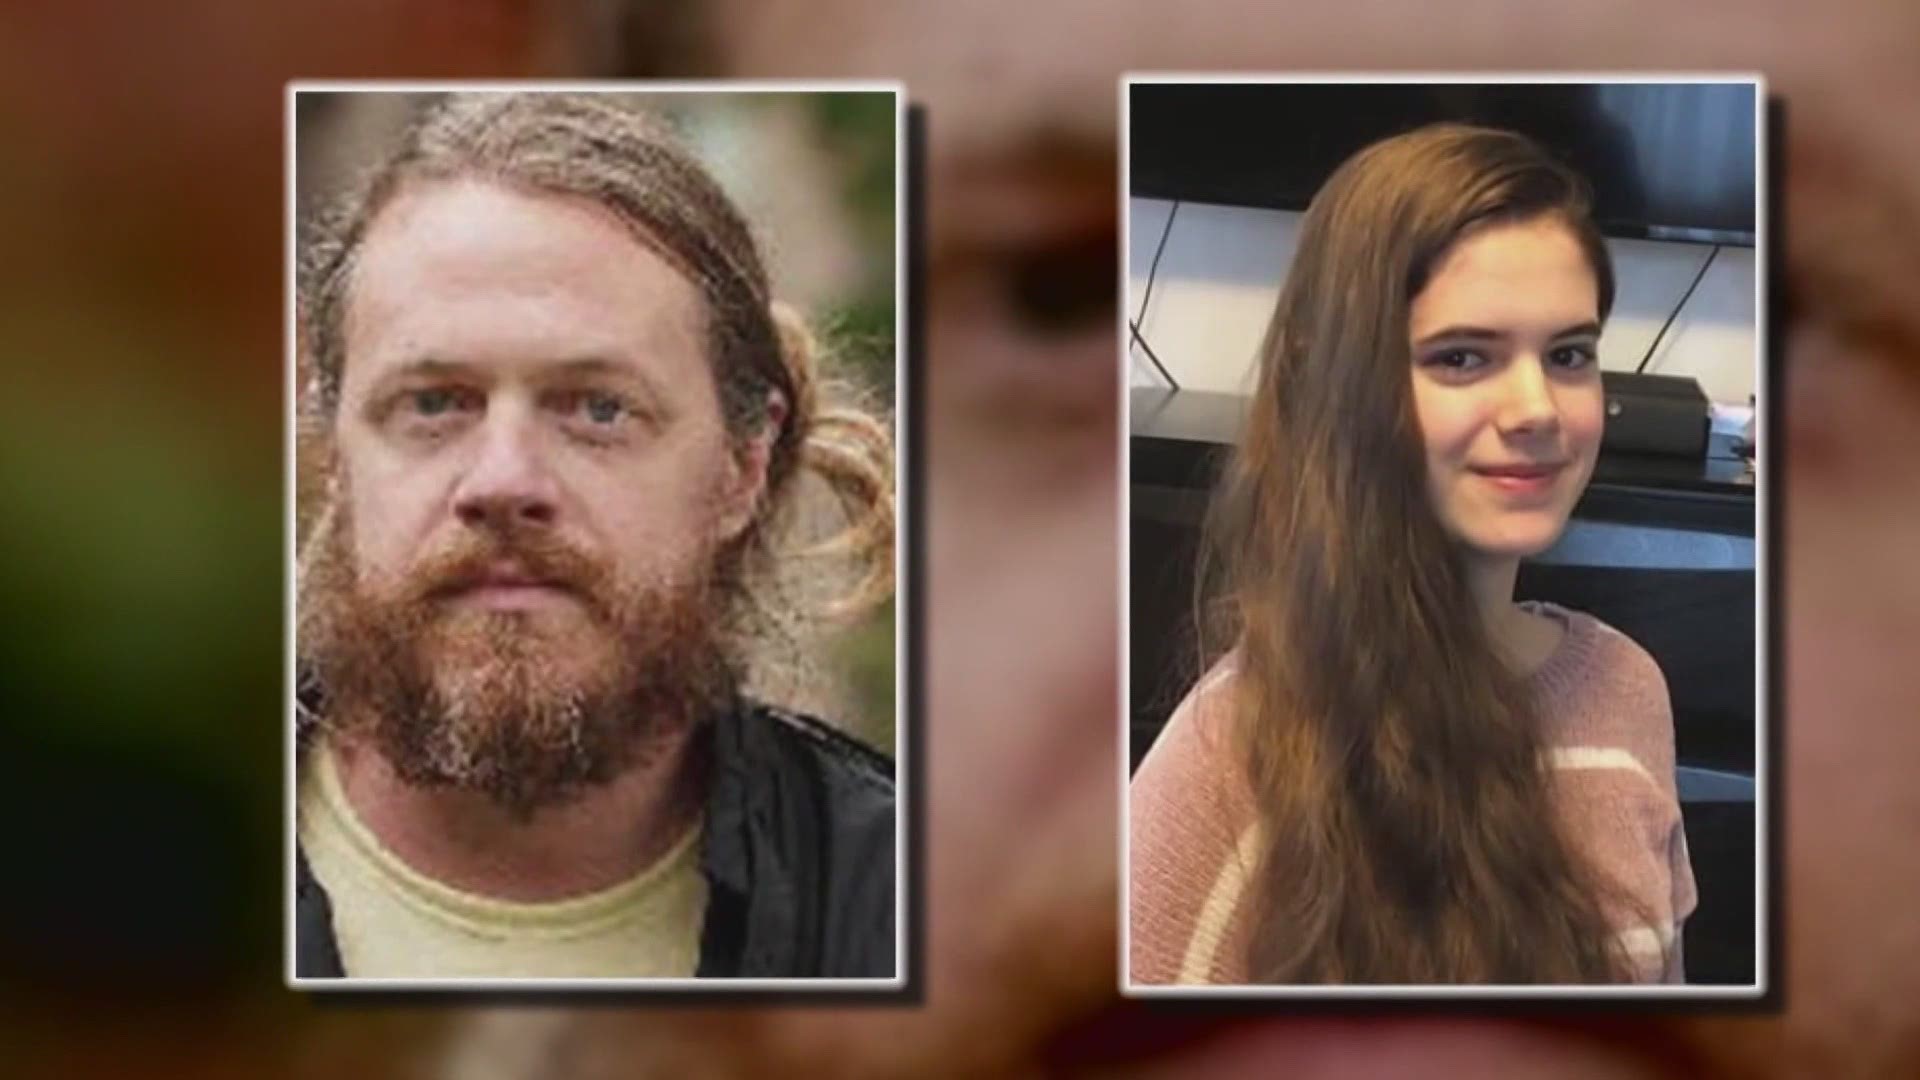 Daphne Westbrook, 17, from Tennessee, has been missing since October 2019. Her father John Oliver Westbrook, accused of kidnapping her, has ties to Auburn